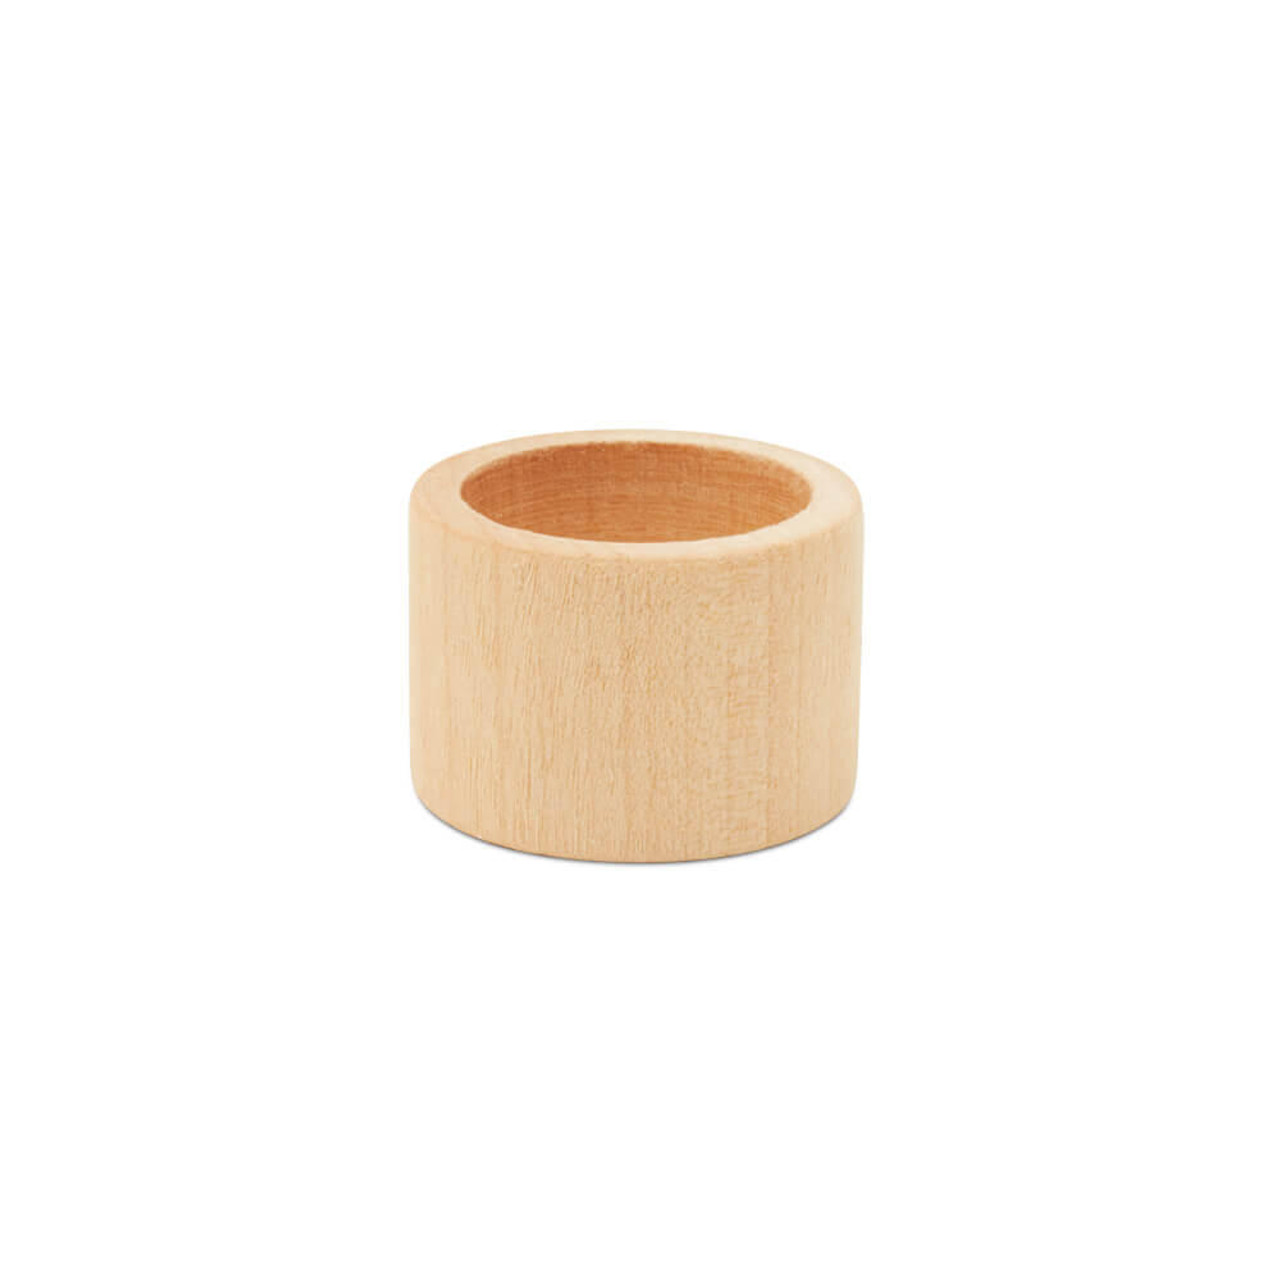 Wooden Rings For Crafts, Macrame, Napkins & Ring Toss Games - Woodpeckers  Crafts